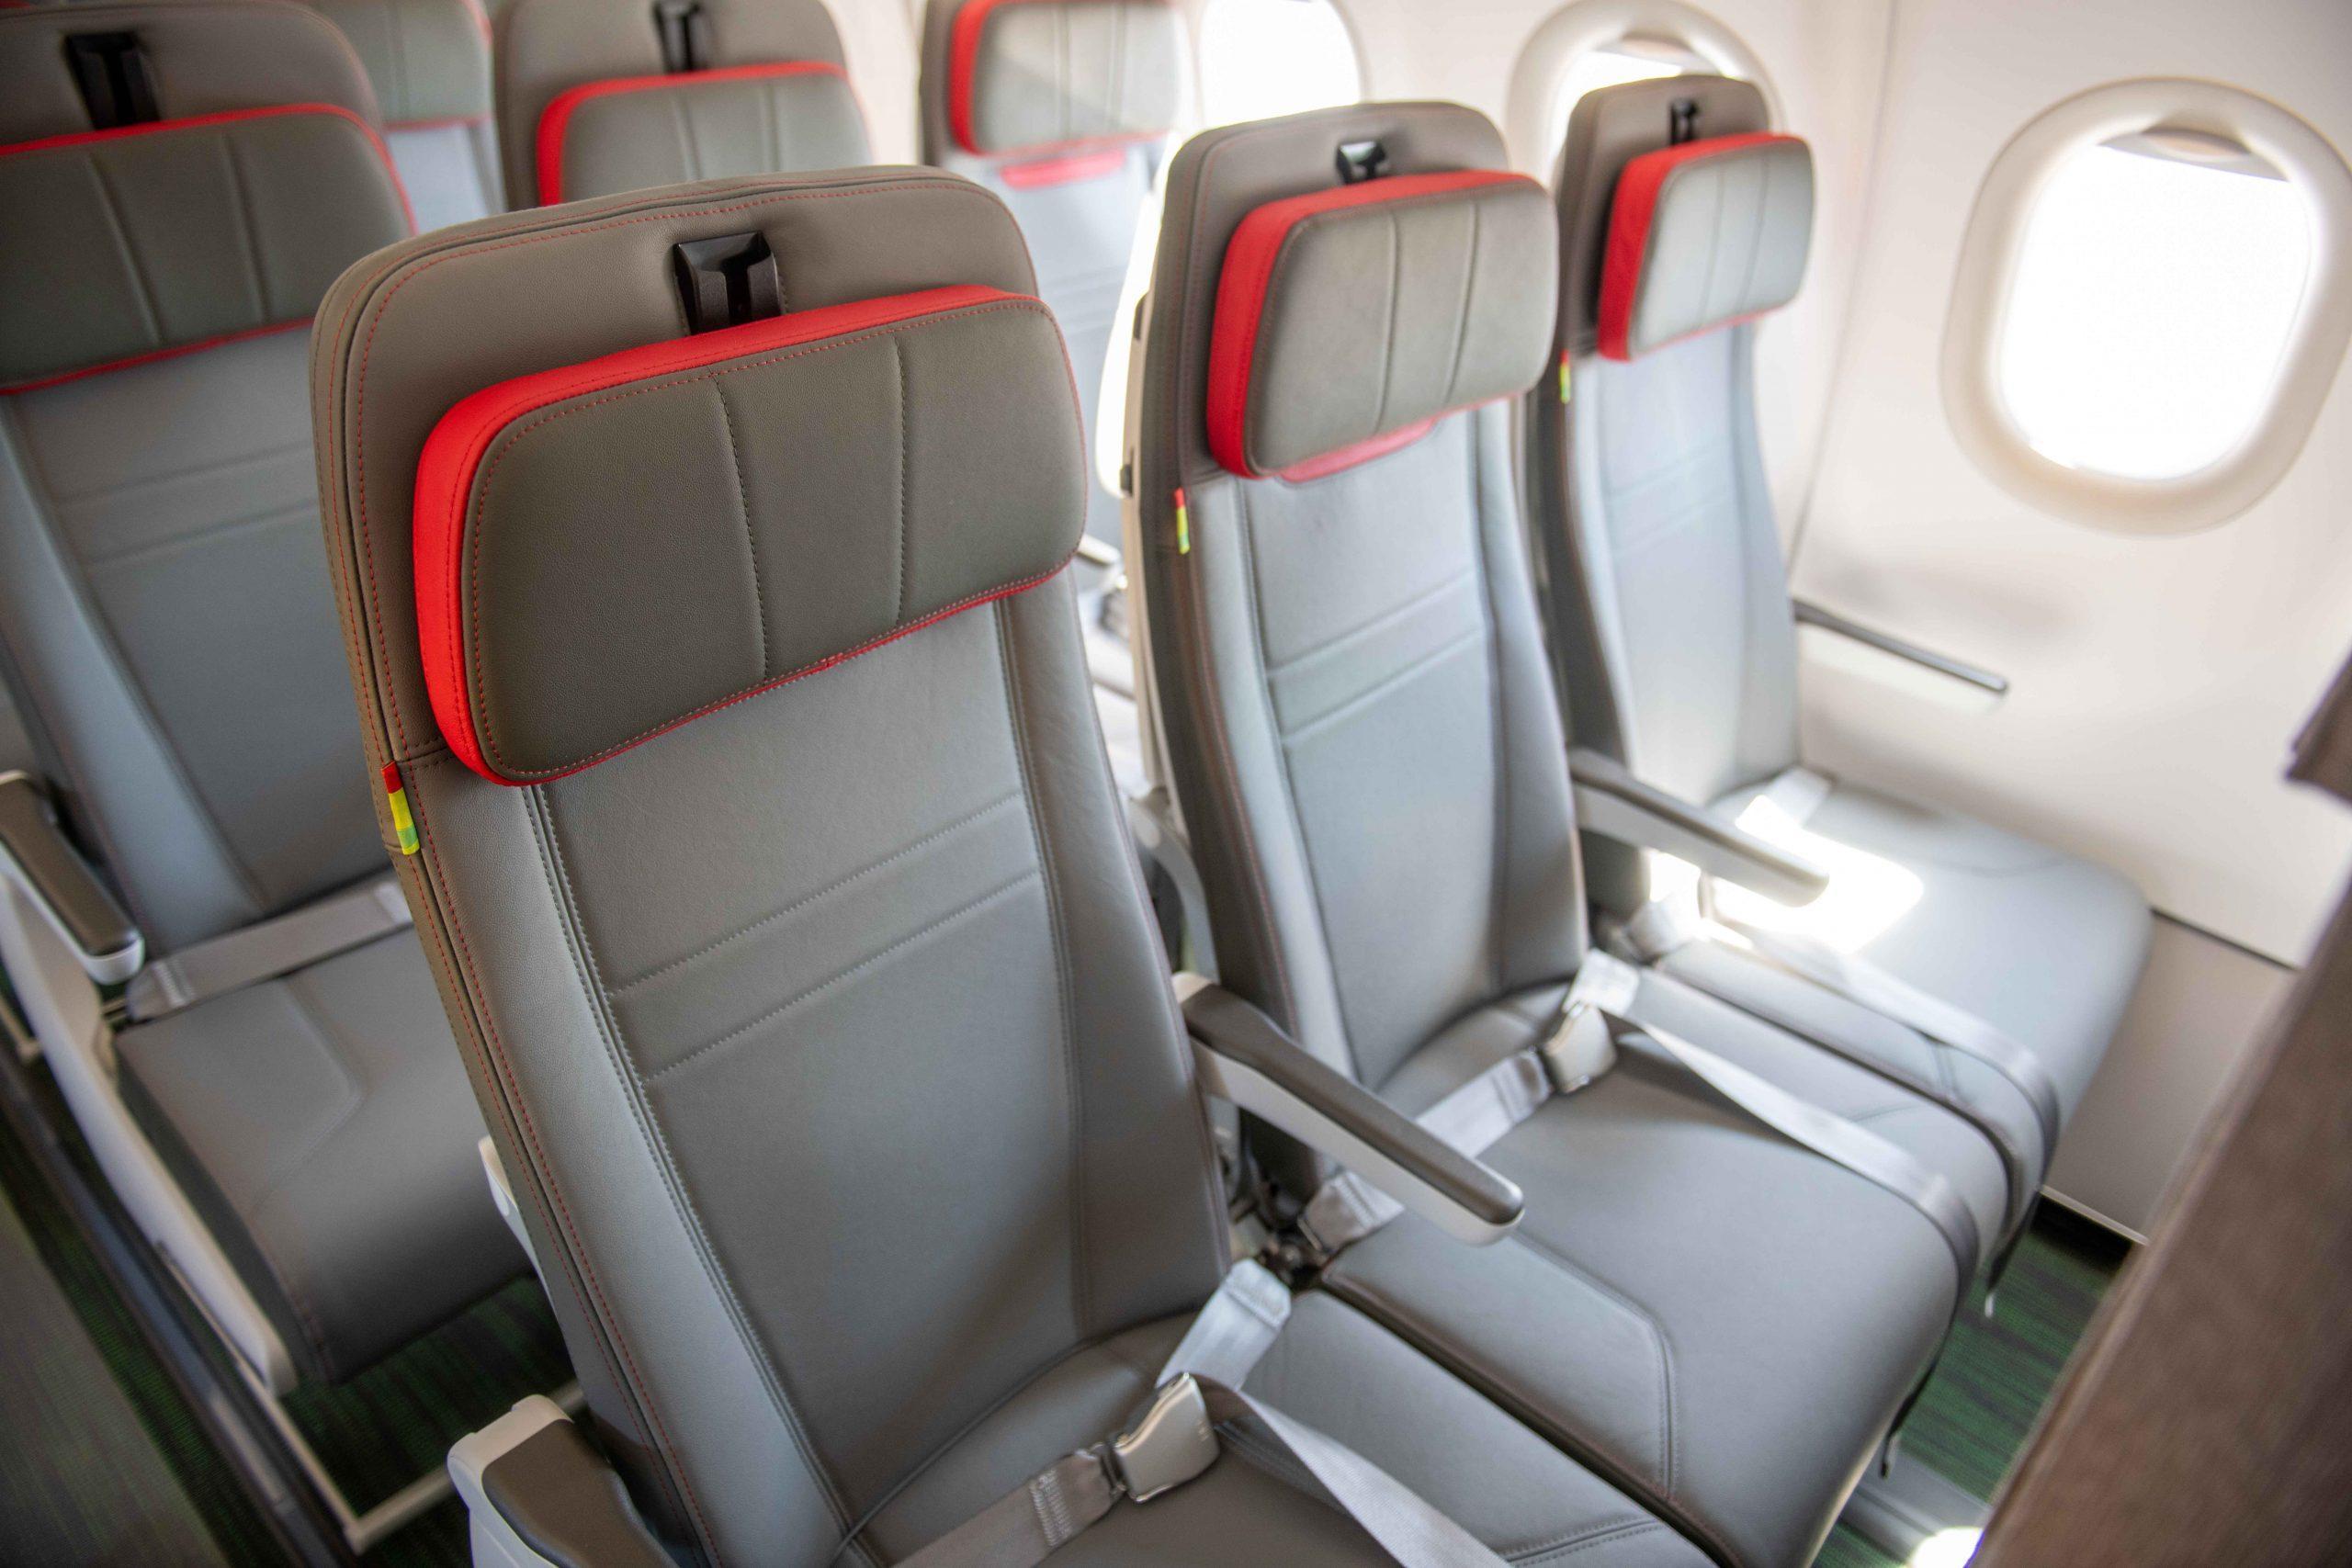 SL3710 and BL3710 Seats on TAP Air Portugal’s Airbus Fleet